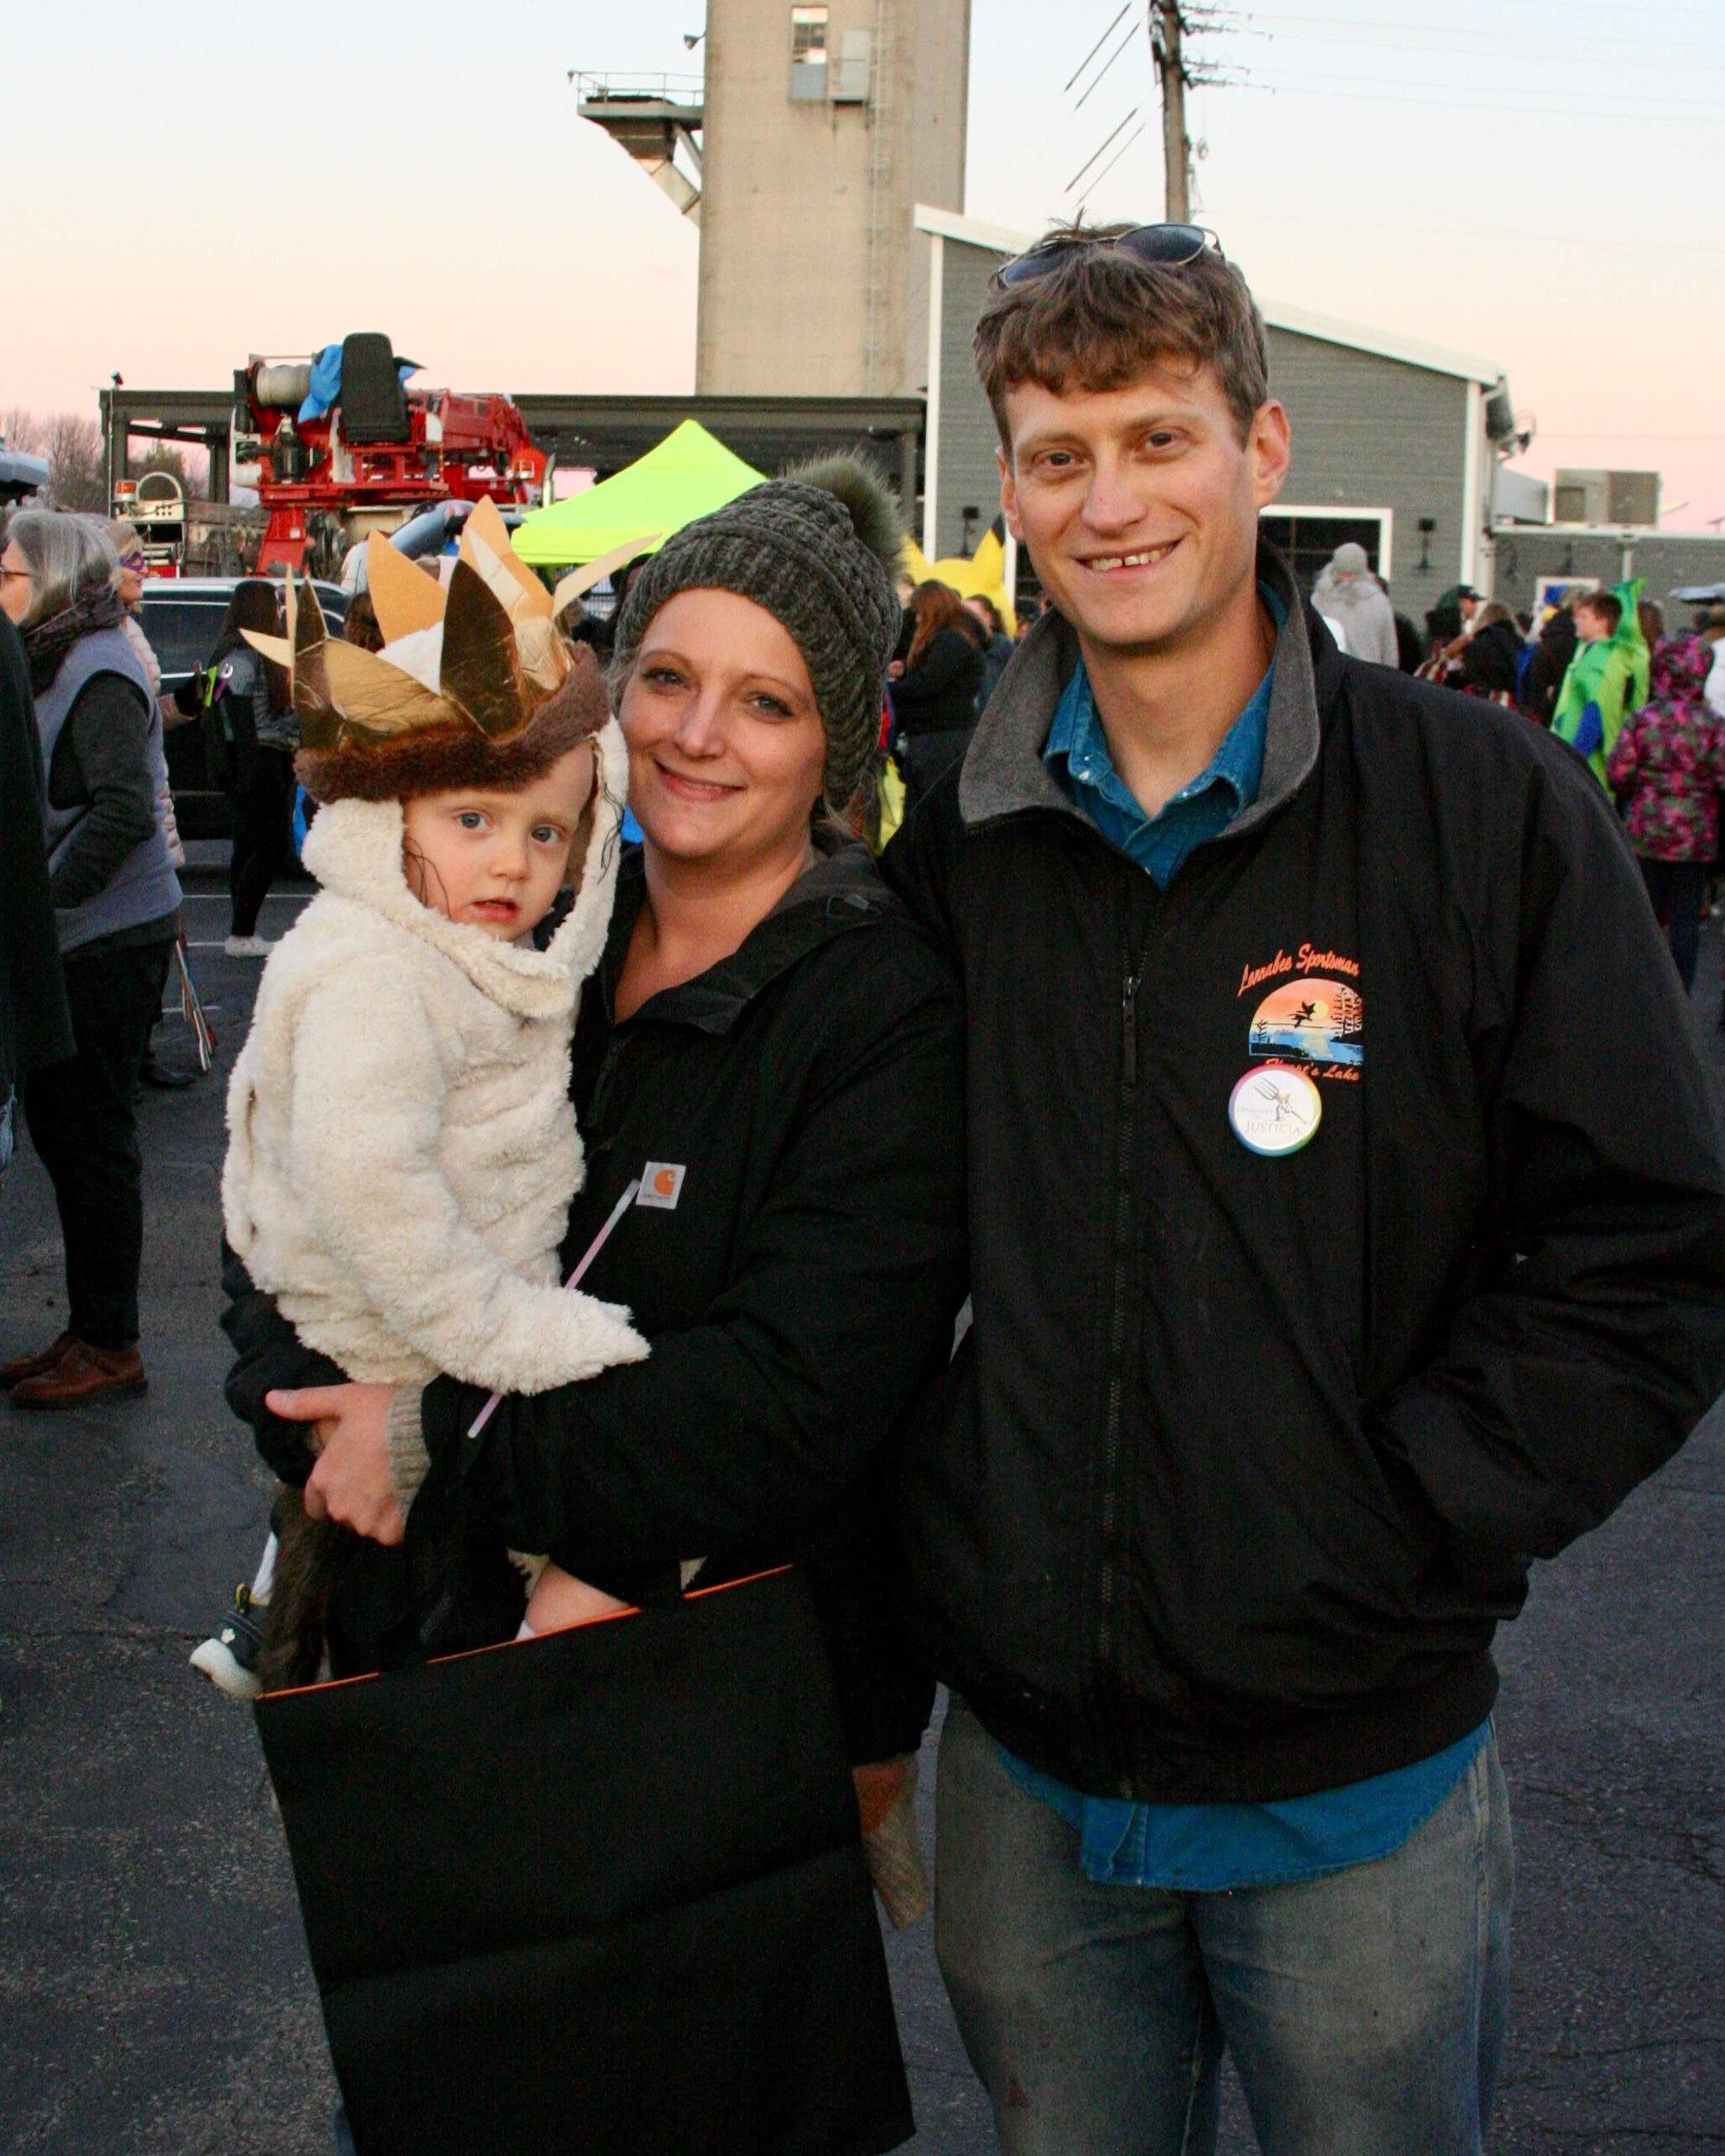 Family with small child dressed as Max from Where the Wild Things Are